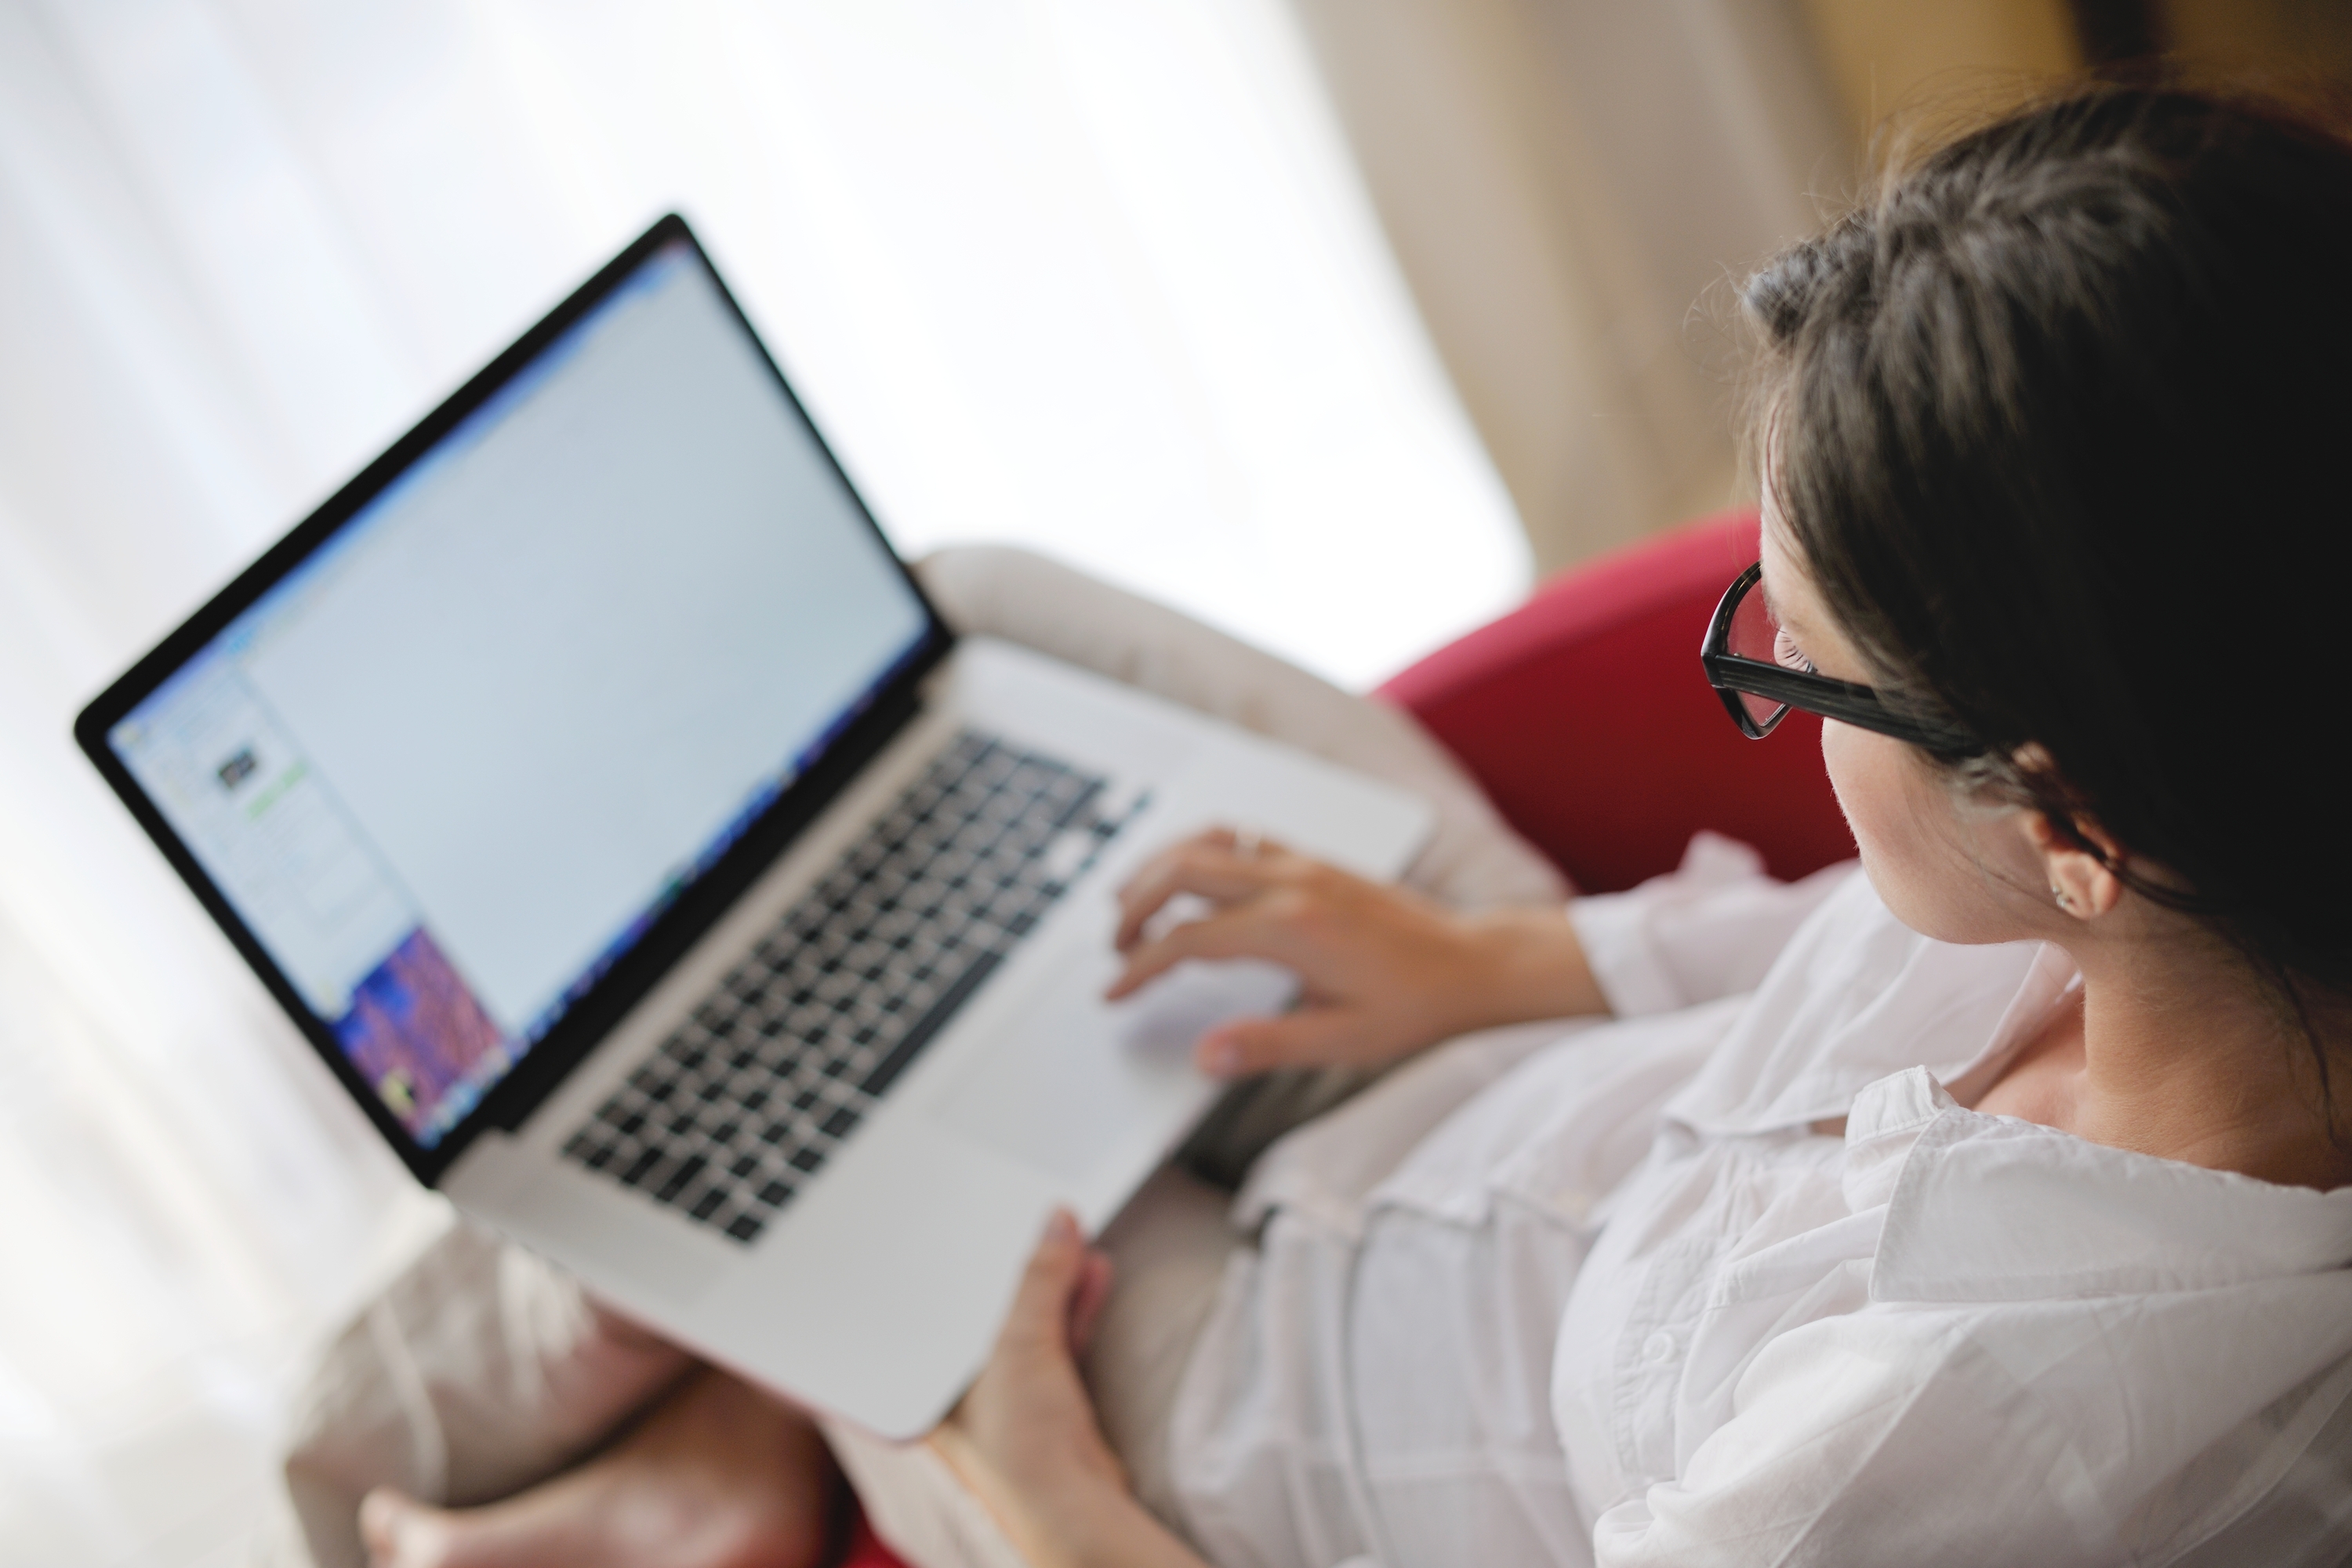 A woman wearing glasses and a white blouse sits relaxed on a red sofa, using a laptop with its screen visible. she appears focused on her work in a softly lit room.